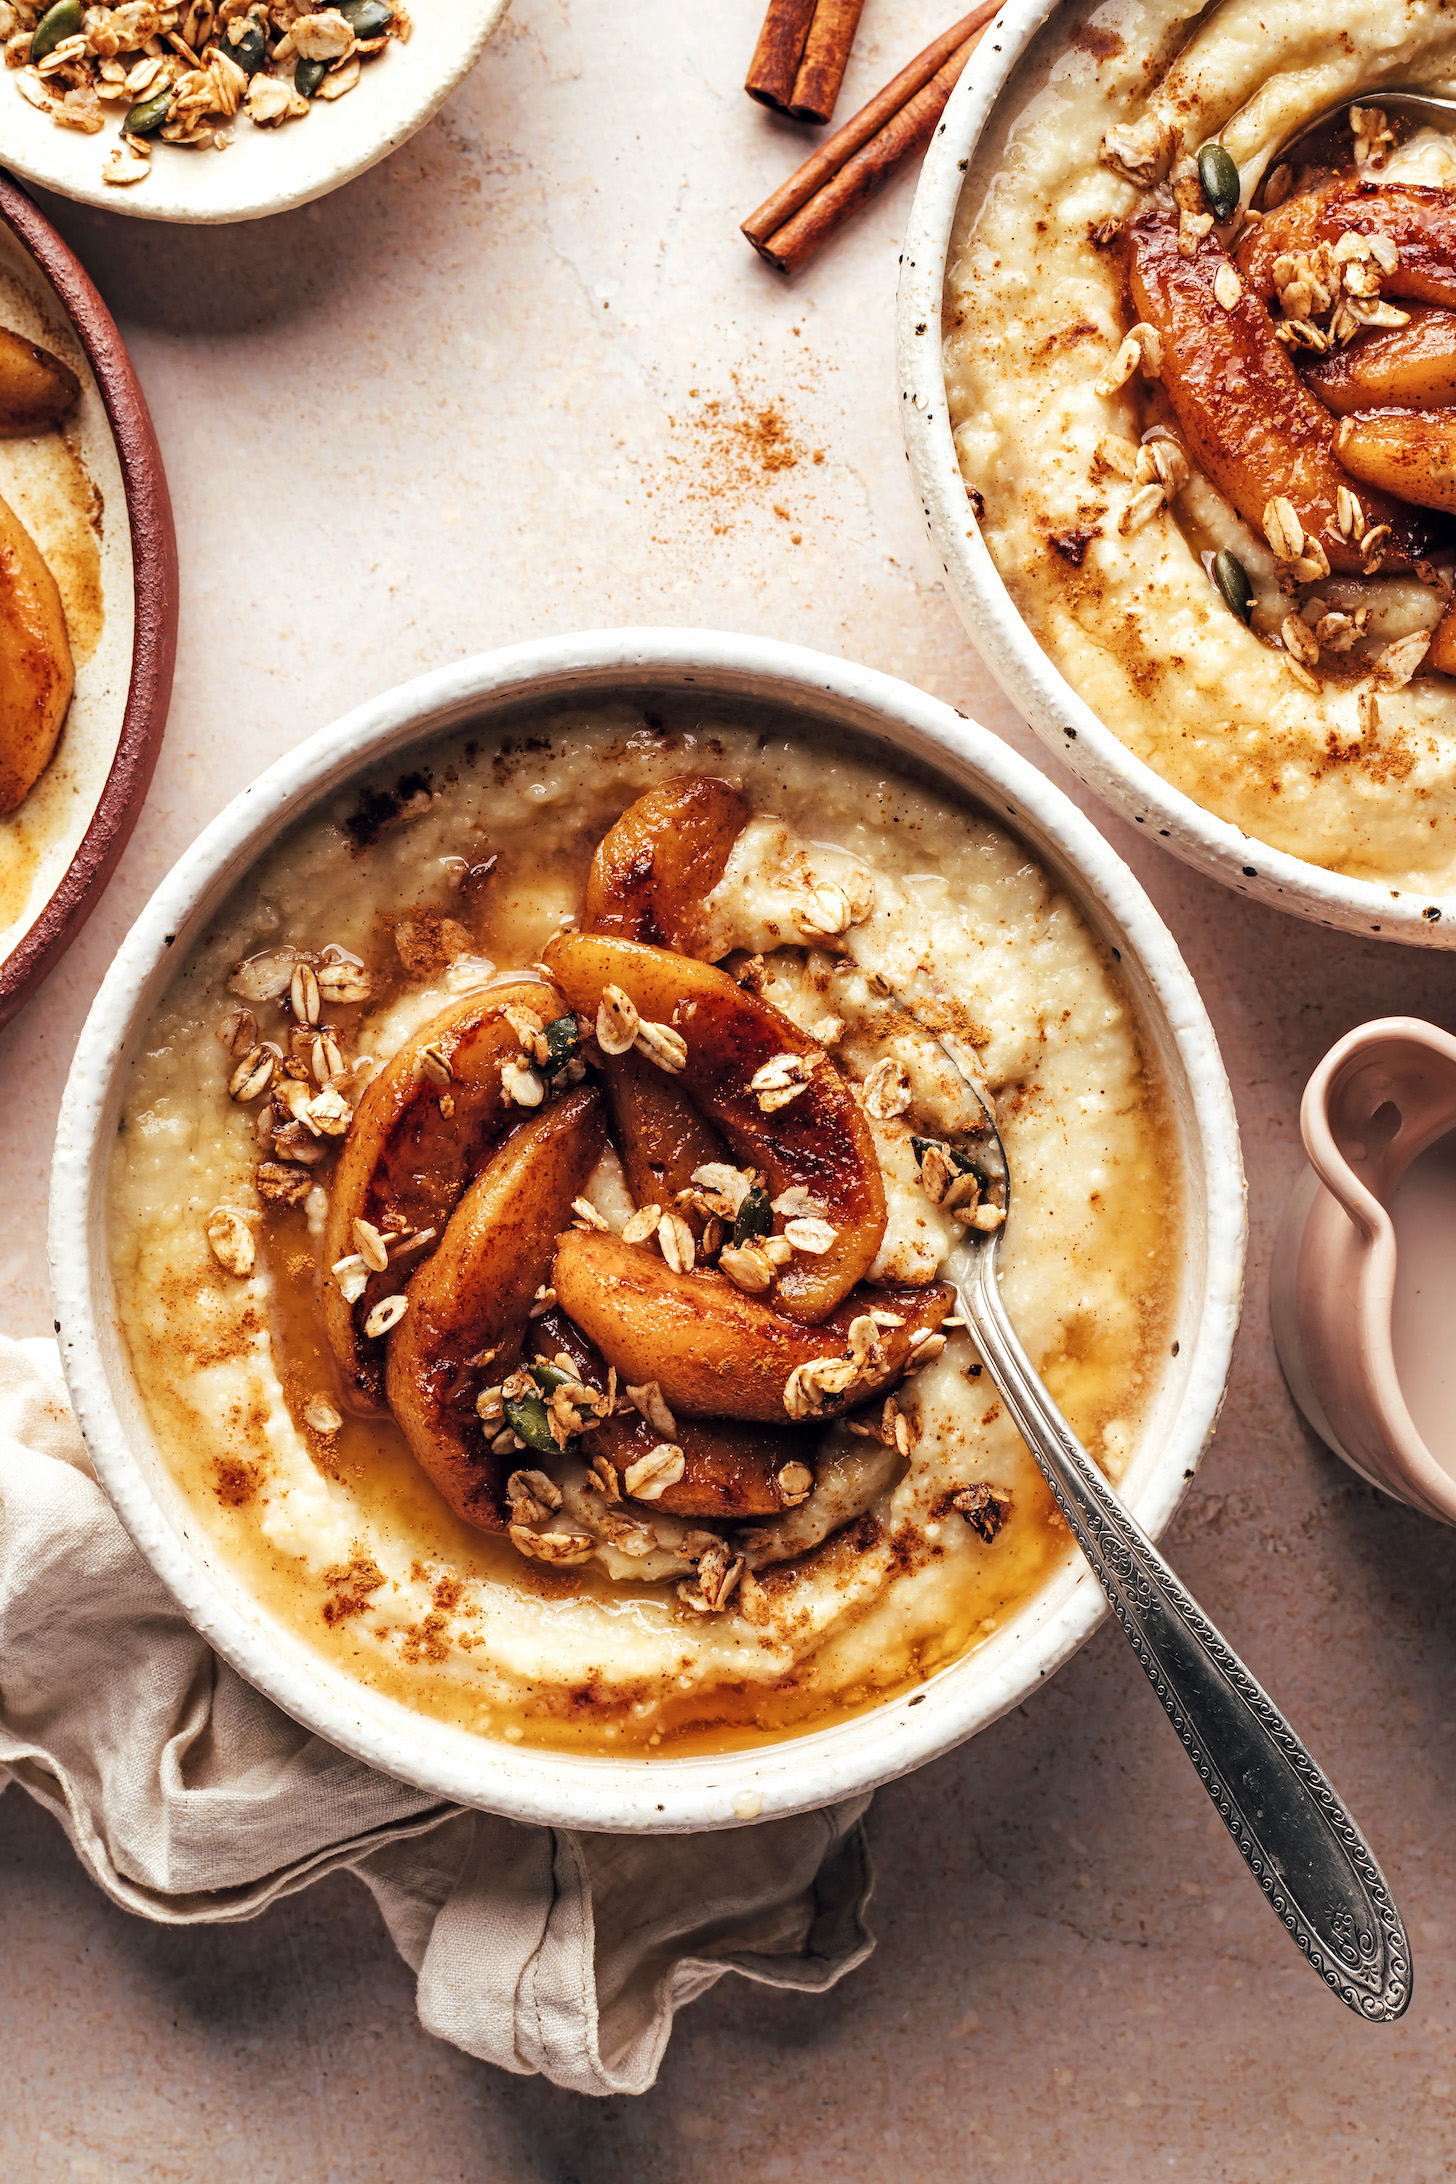 Bowls of millet porridge topped with cinnamon-spiced pears and granola